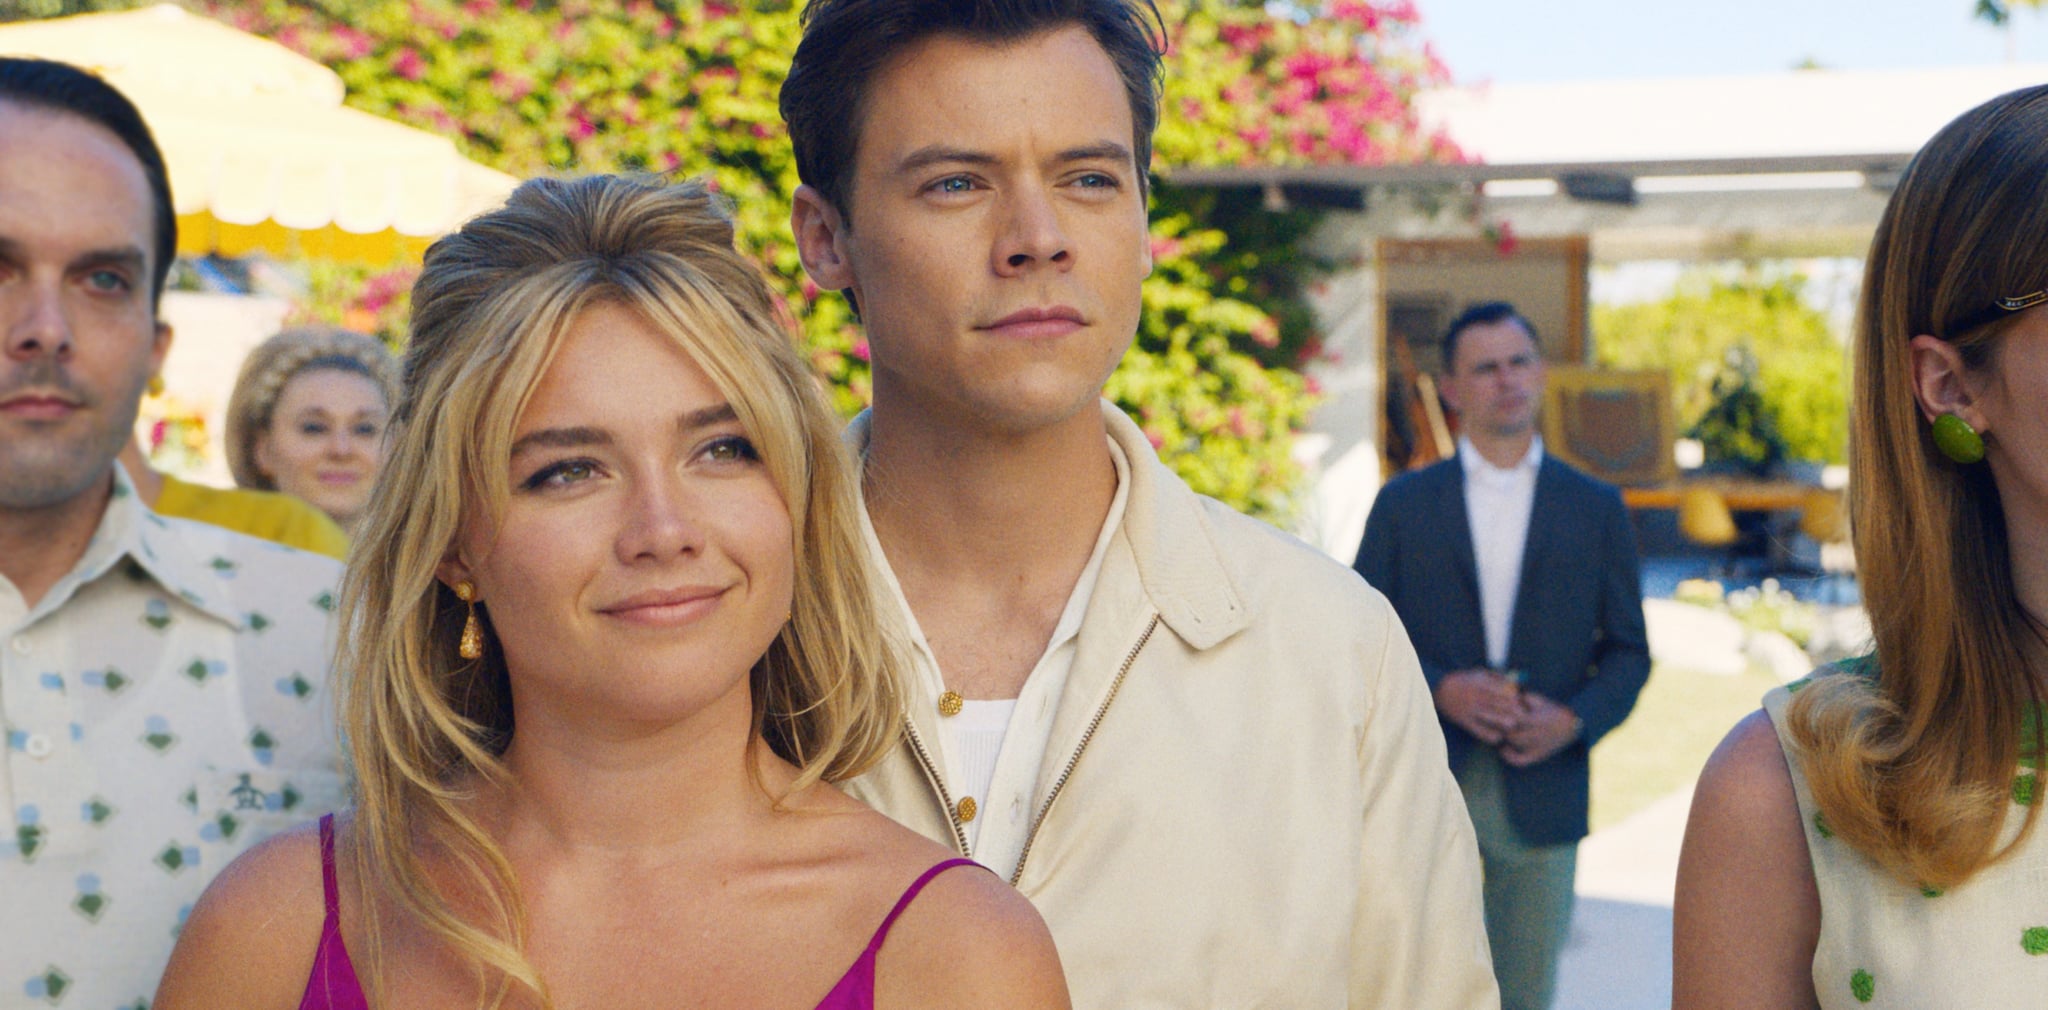 DON'T WORRY DARLING, from left: Florence Pugh, Harry Styles, 2022. Warner Bros. / Courtesy Everett Collection